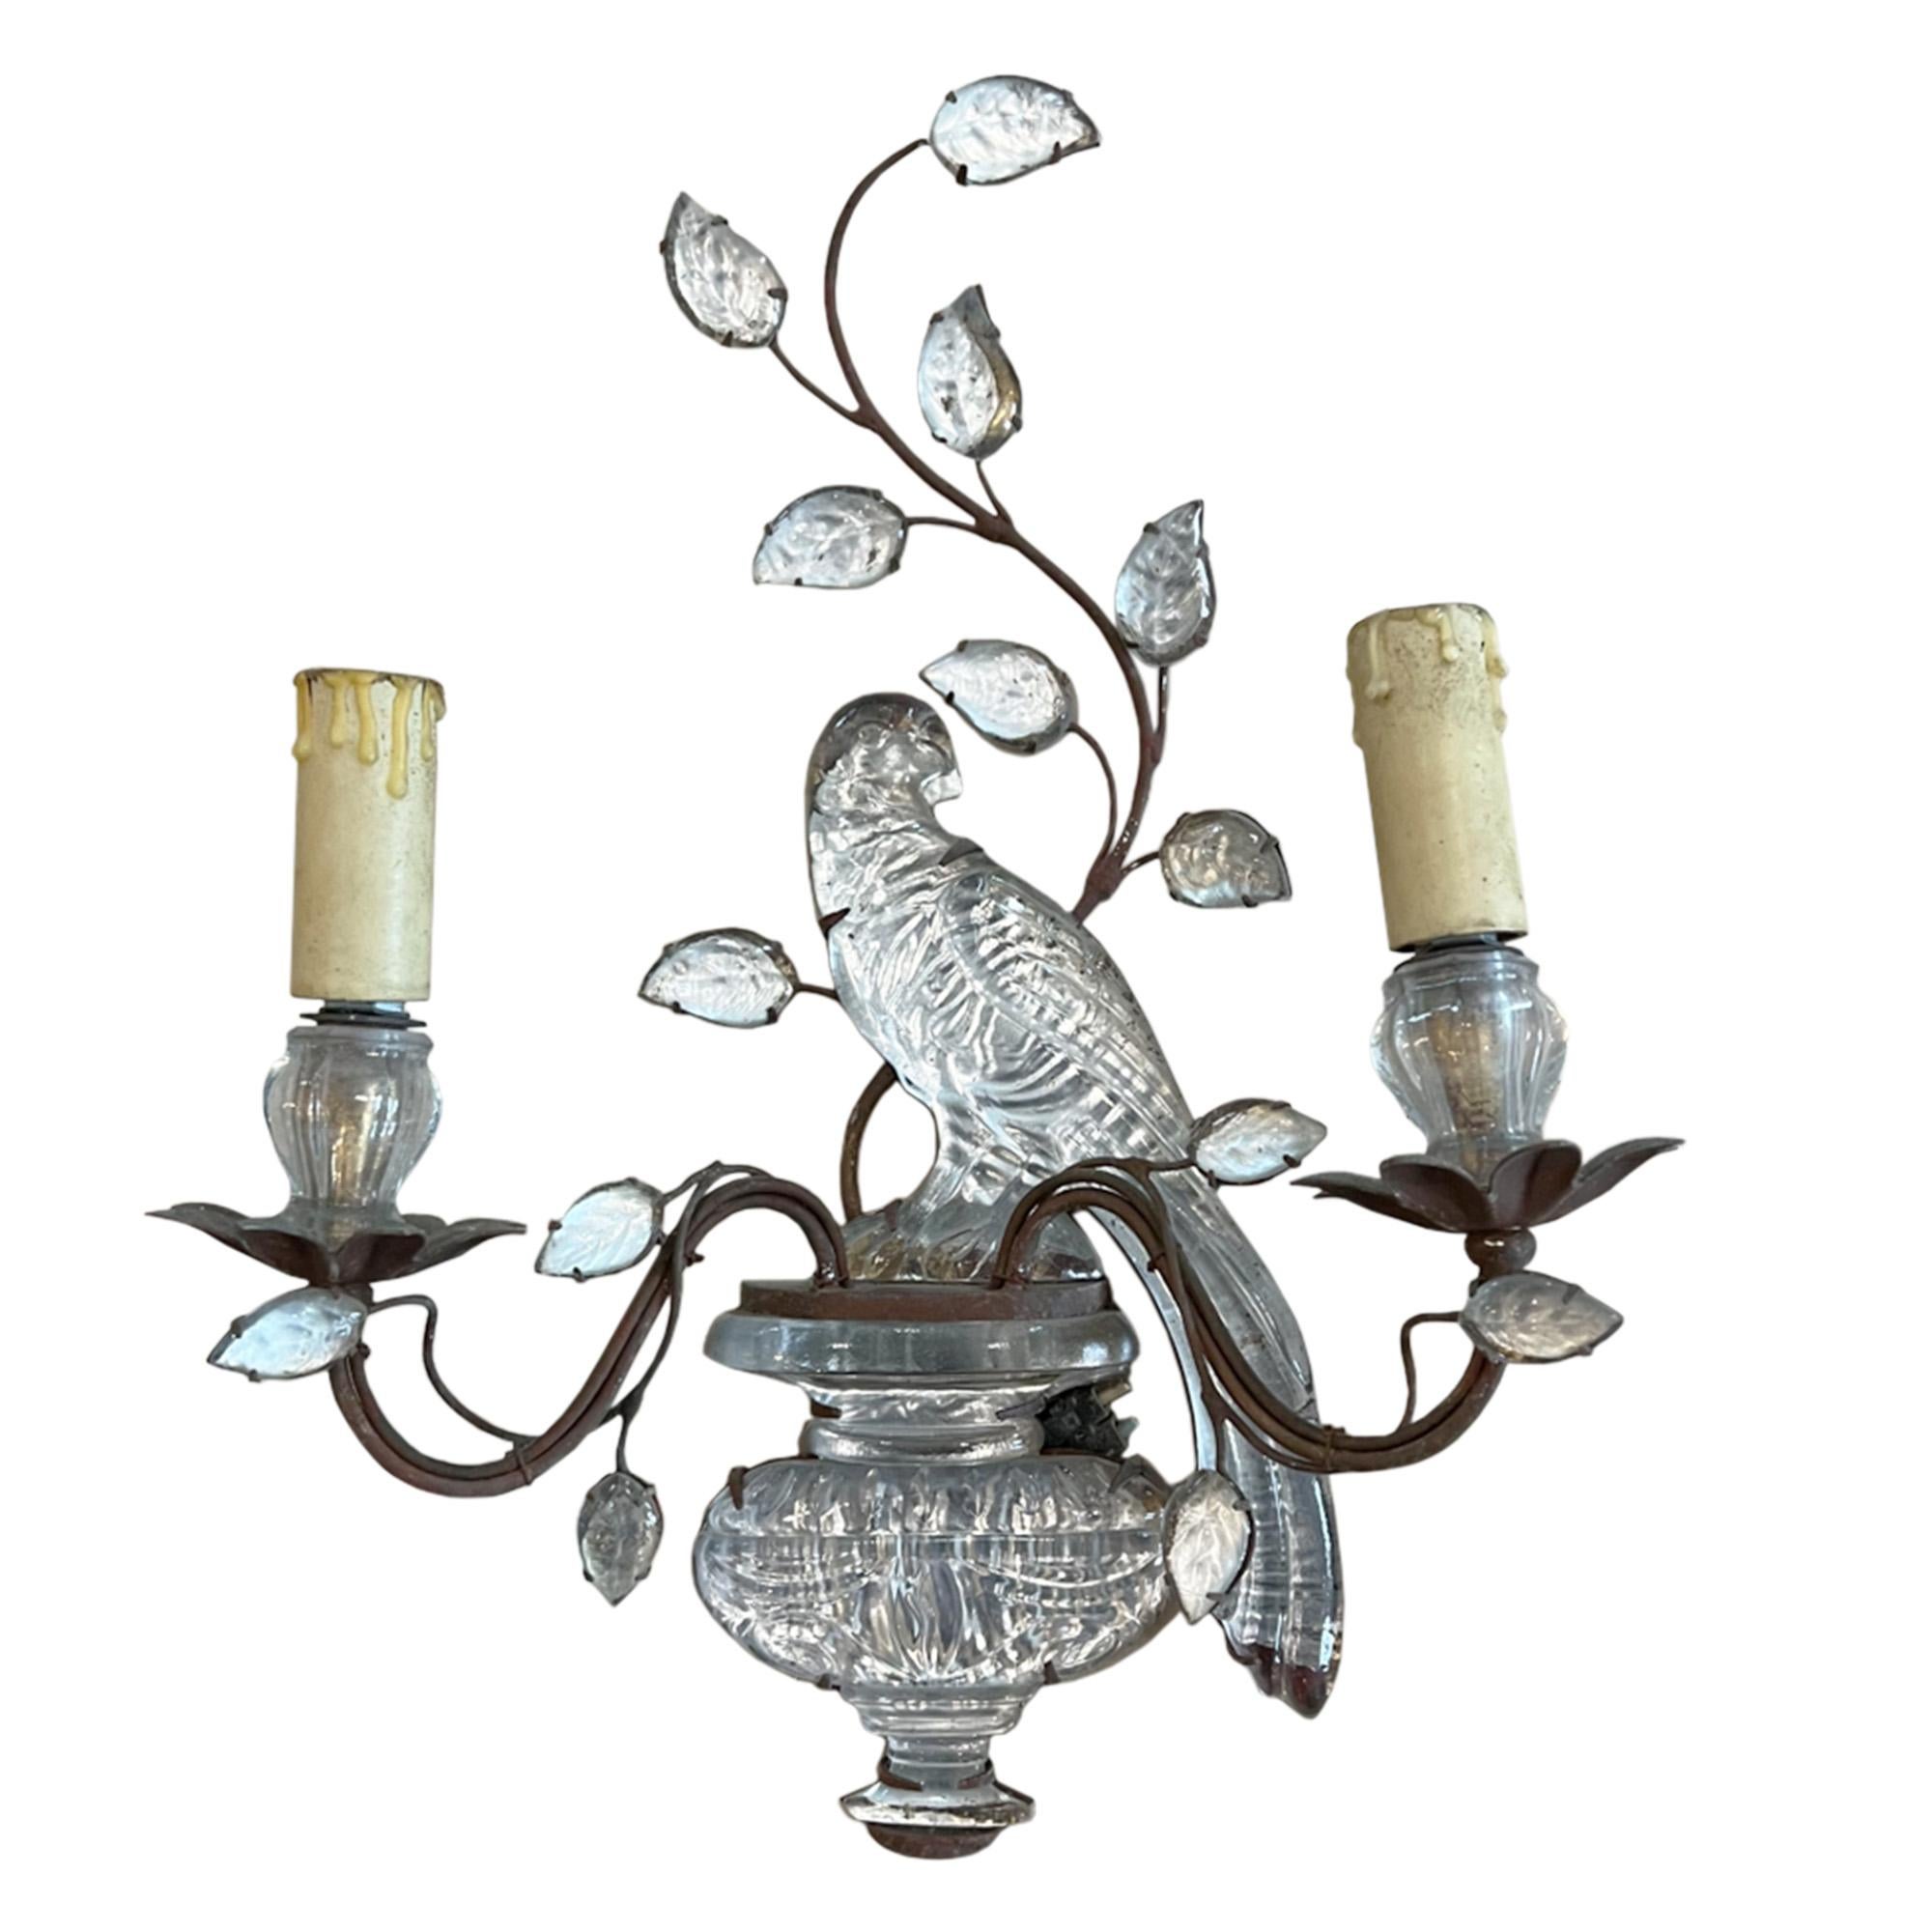 Hand-Crafted Pair of Maison Baguès Wall Sconces with Parrot and Urn Decoration  For Sale